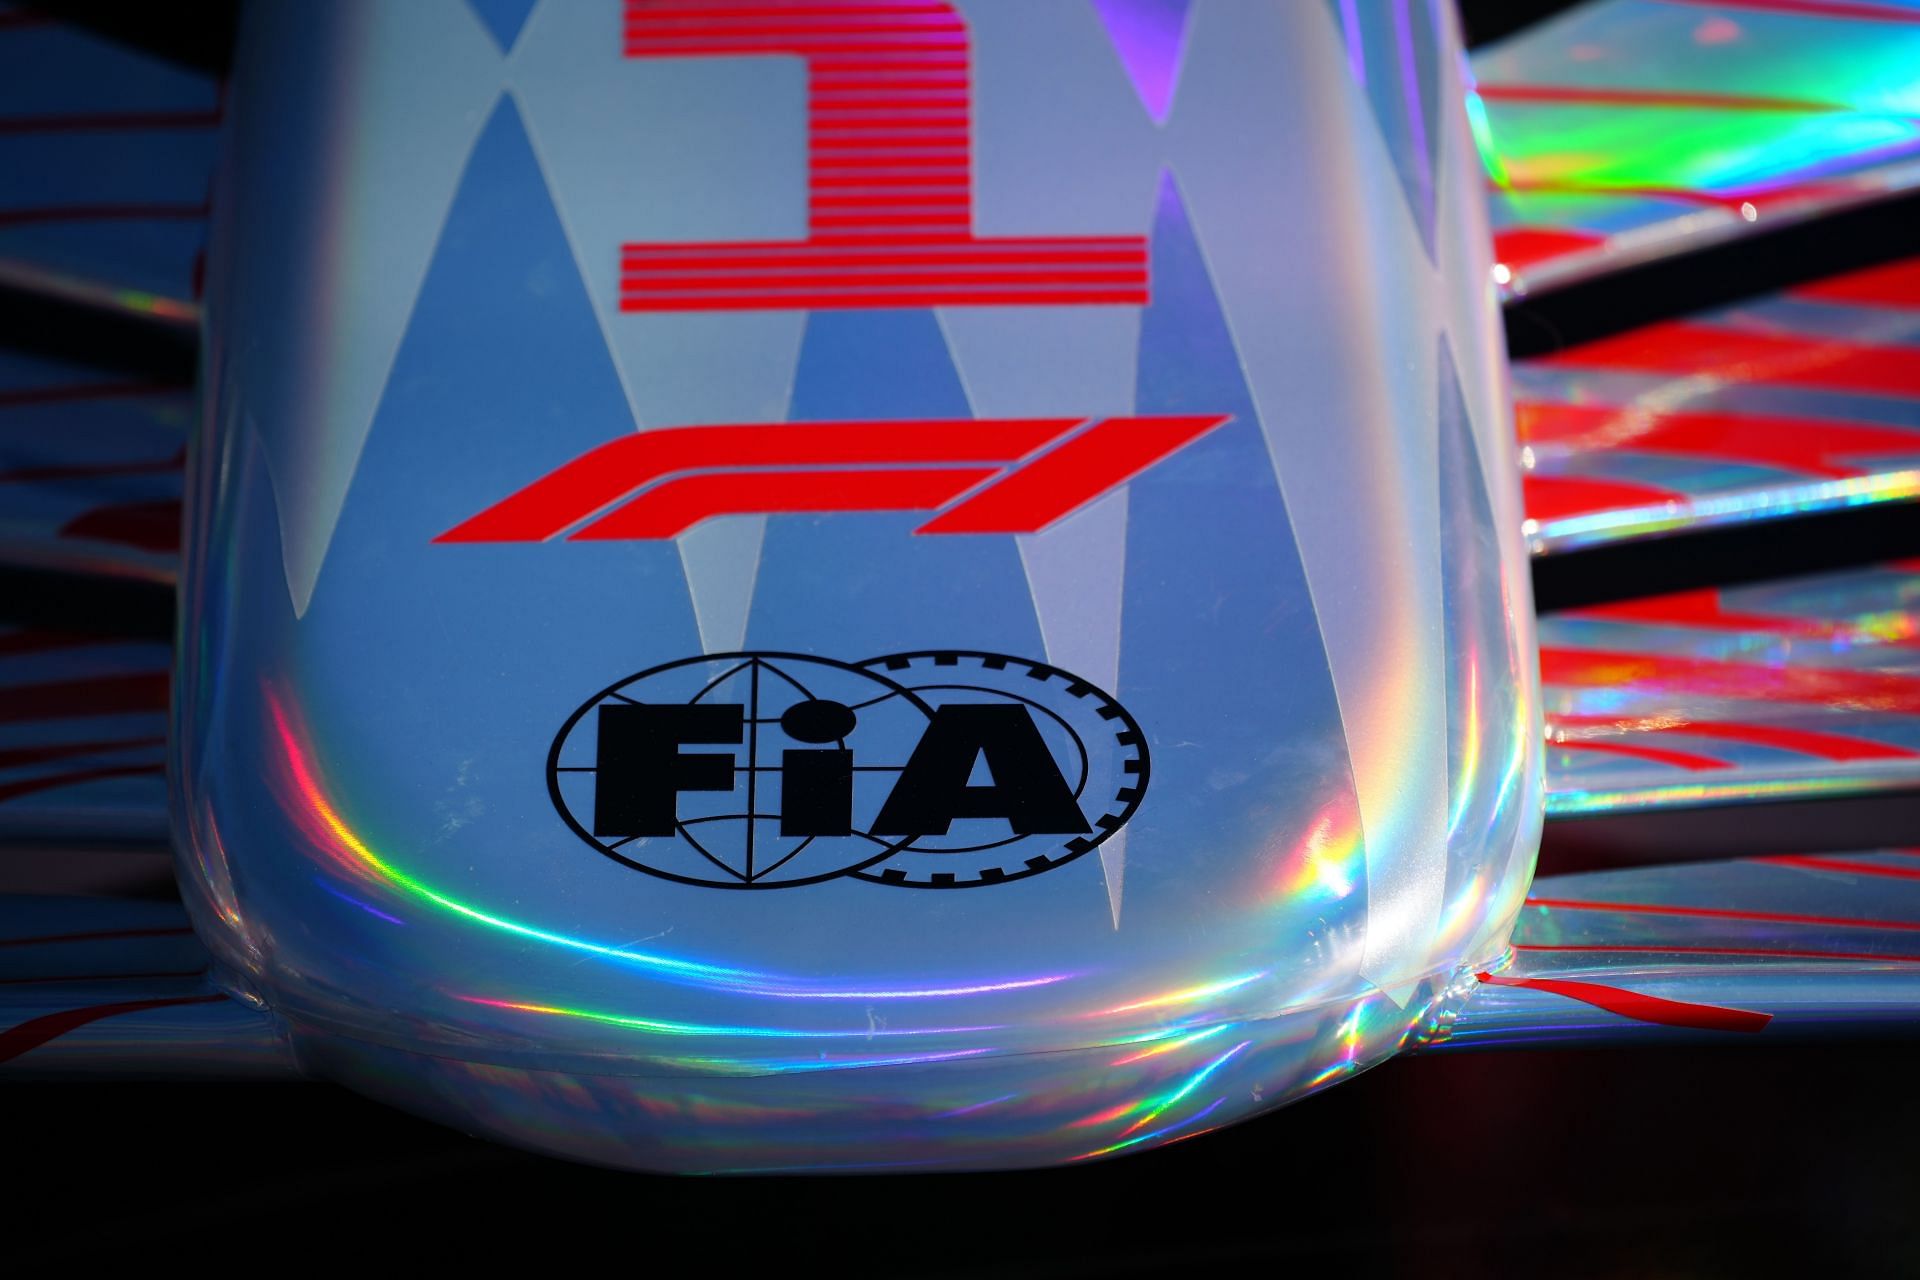 The 2022 F1 calendar will mark the dawn of a new era in the sport (Photo by Christopher Furlong/Getty Images)